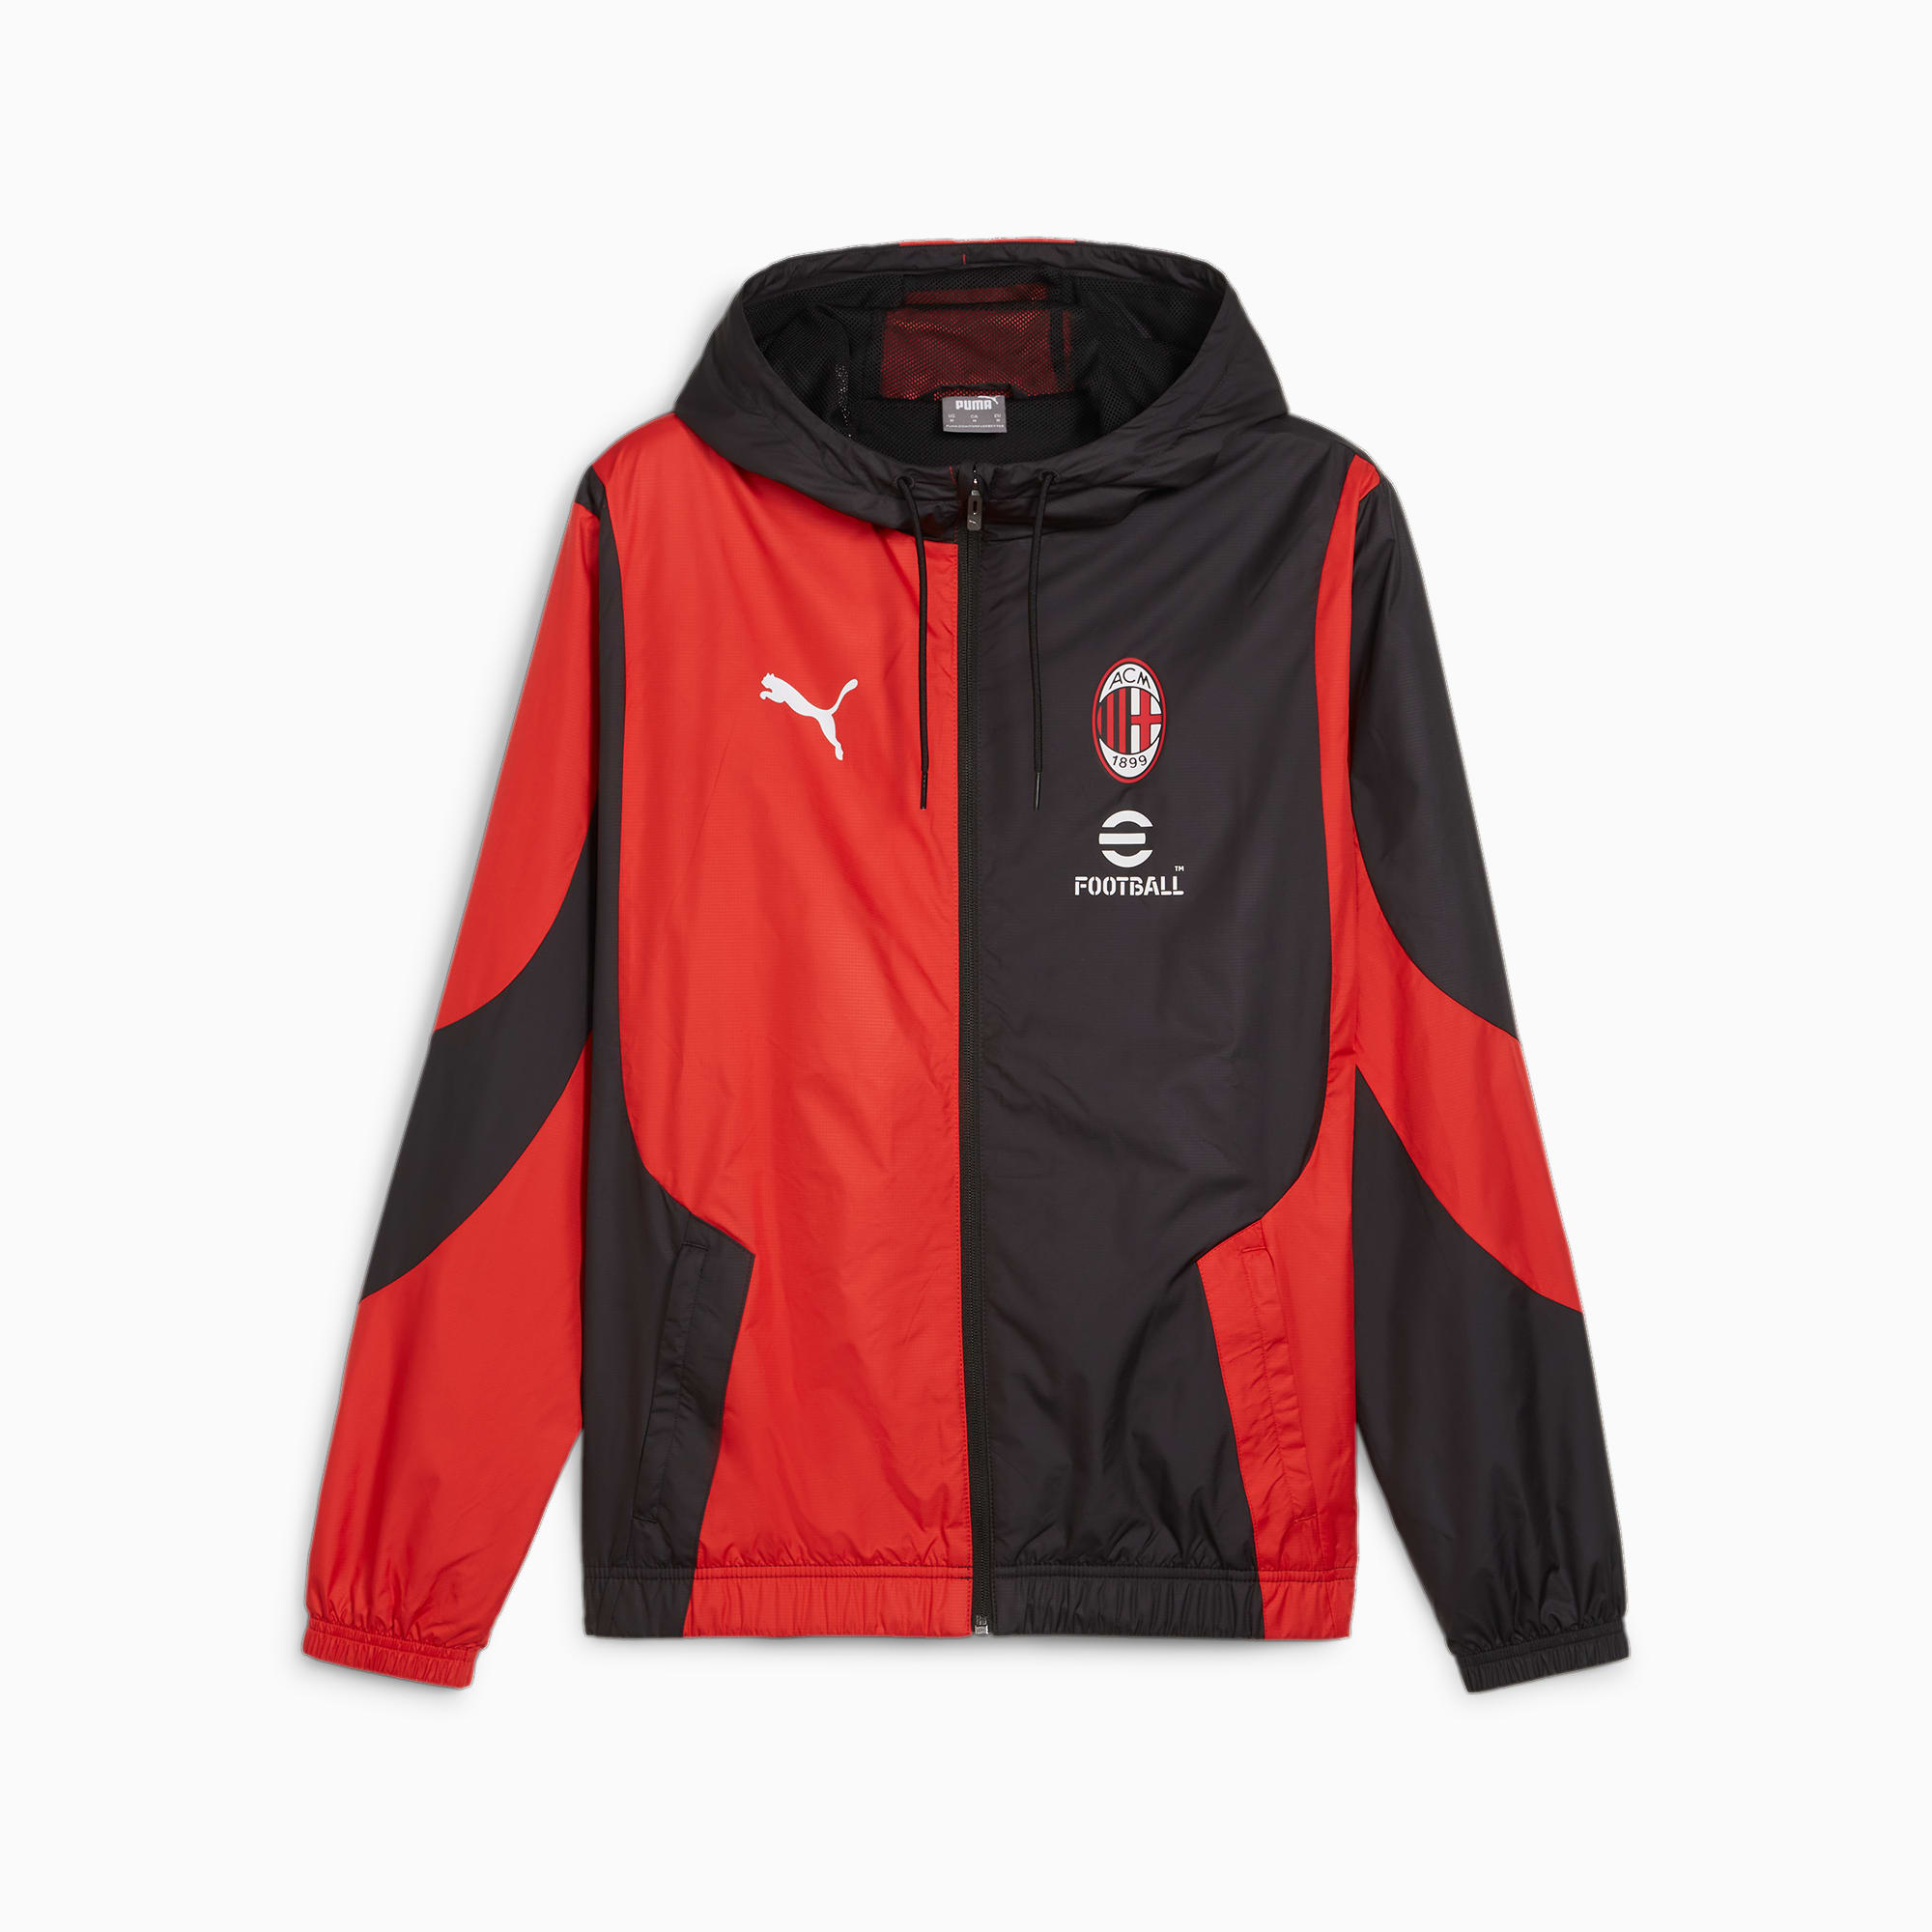 Men's PUMA AC Milan Pre-Match Jacket, Black/For All Time Red, Size XS, Clothing